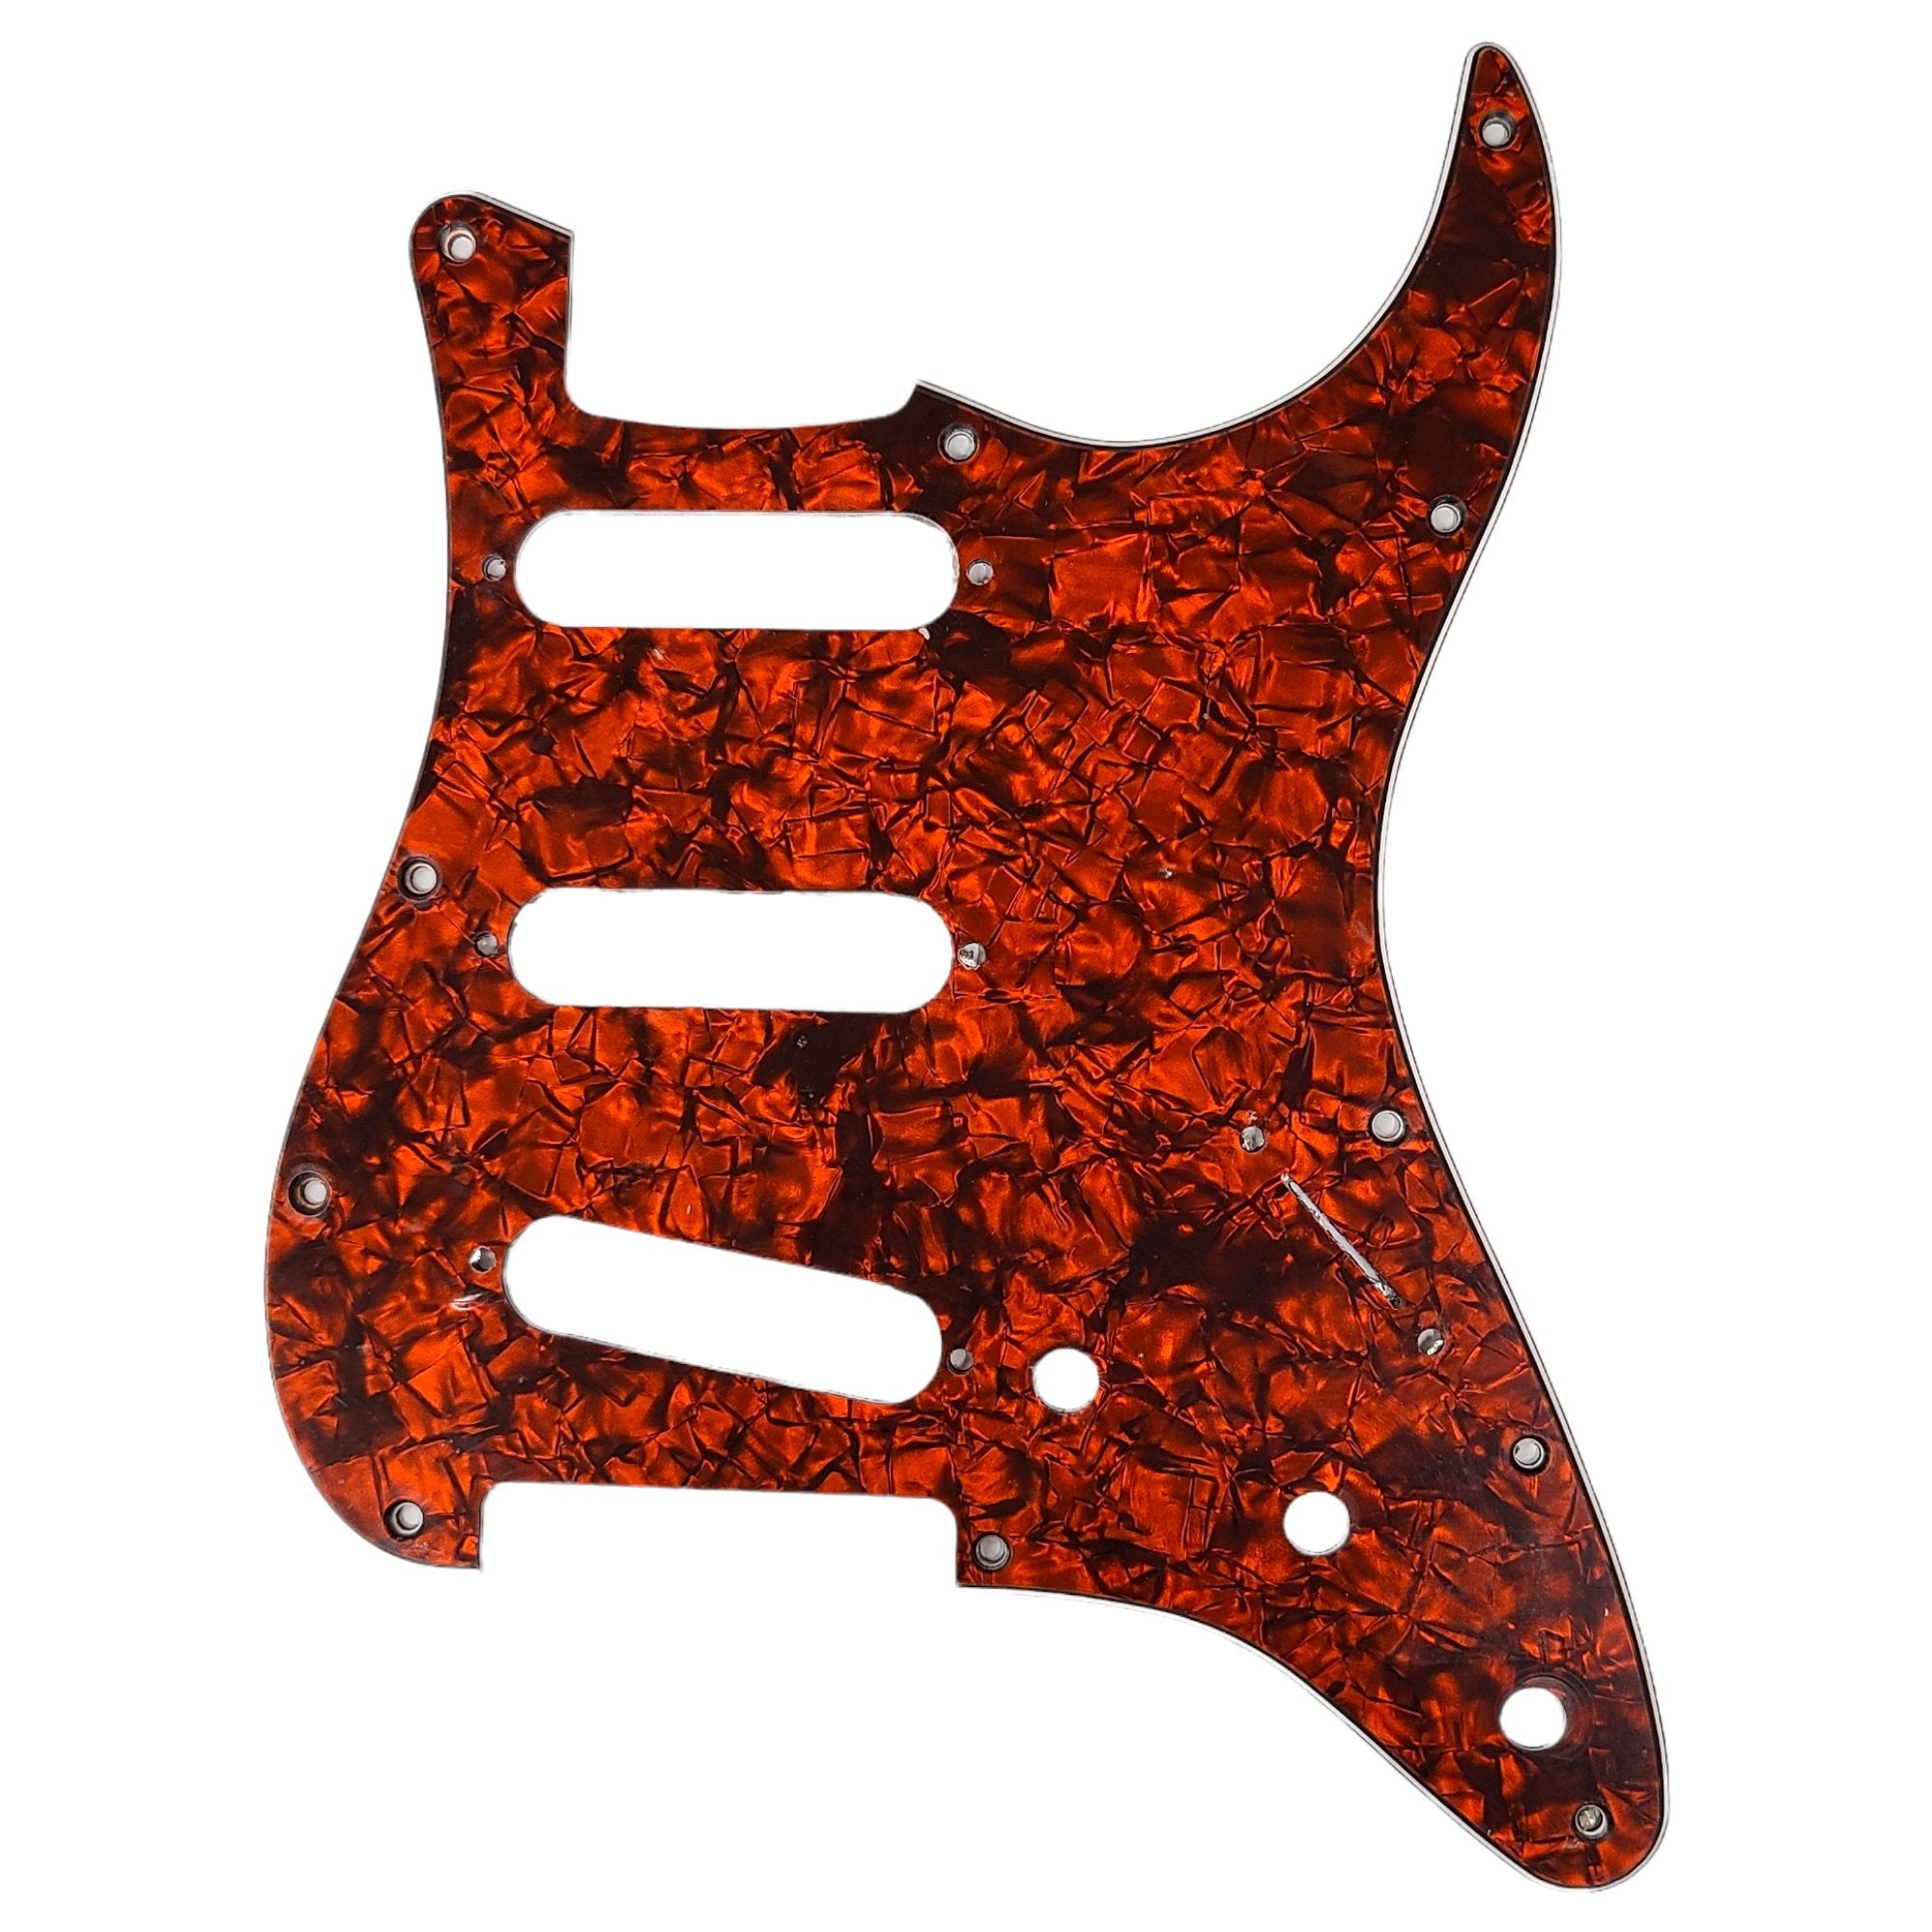 D’Andrea Stratocaster SSS Pickguards for Electric Guitar